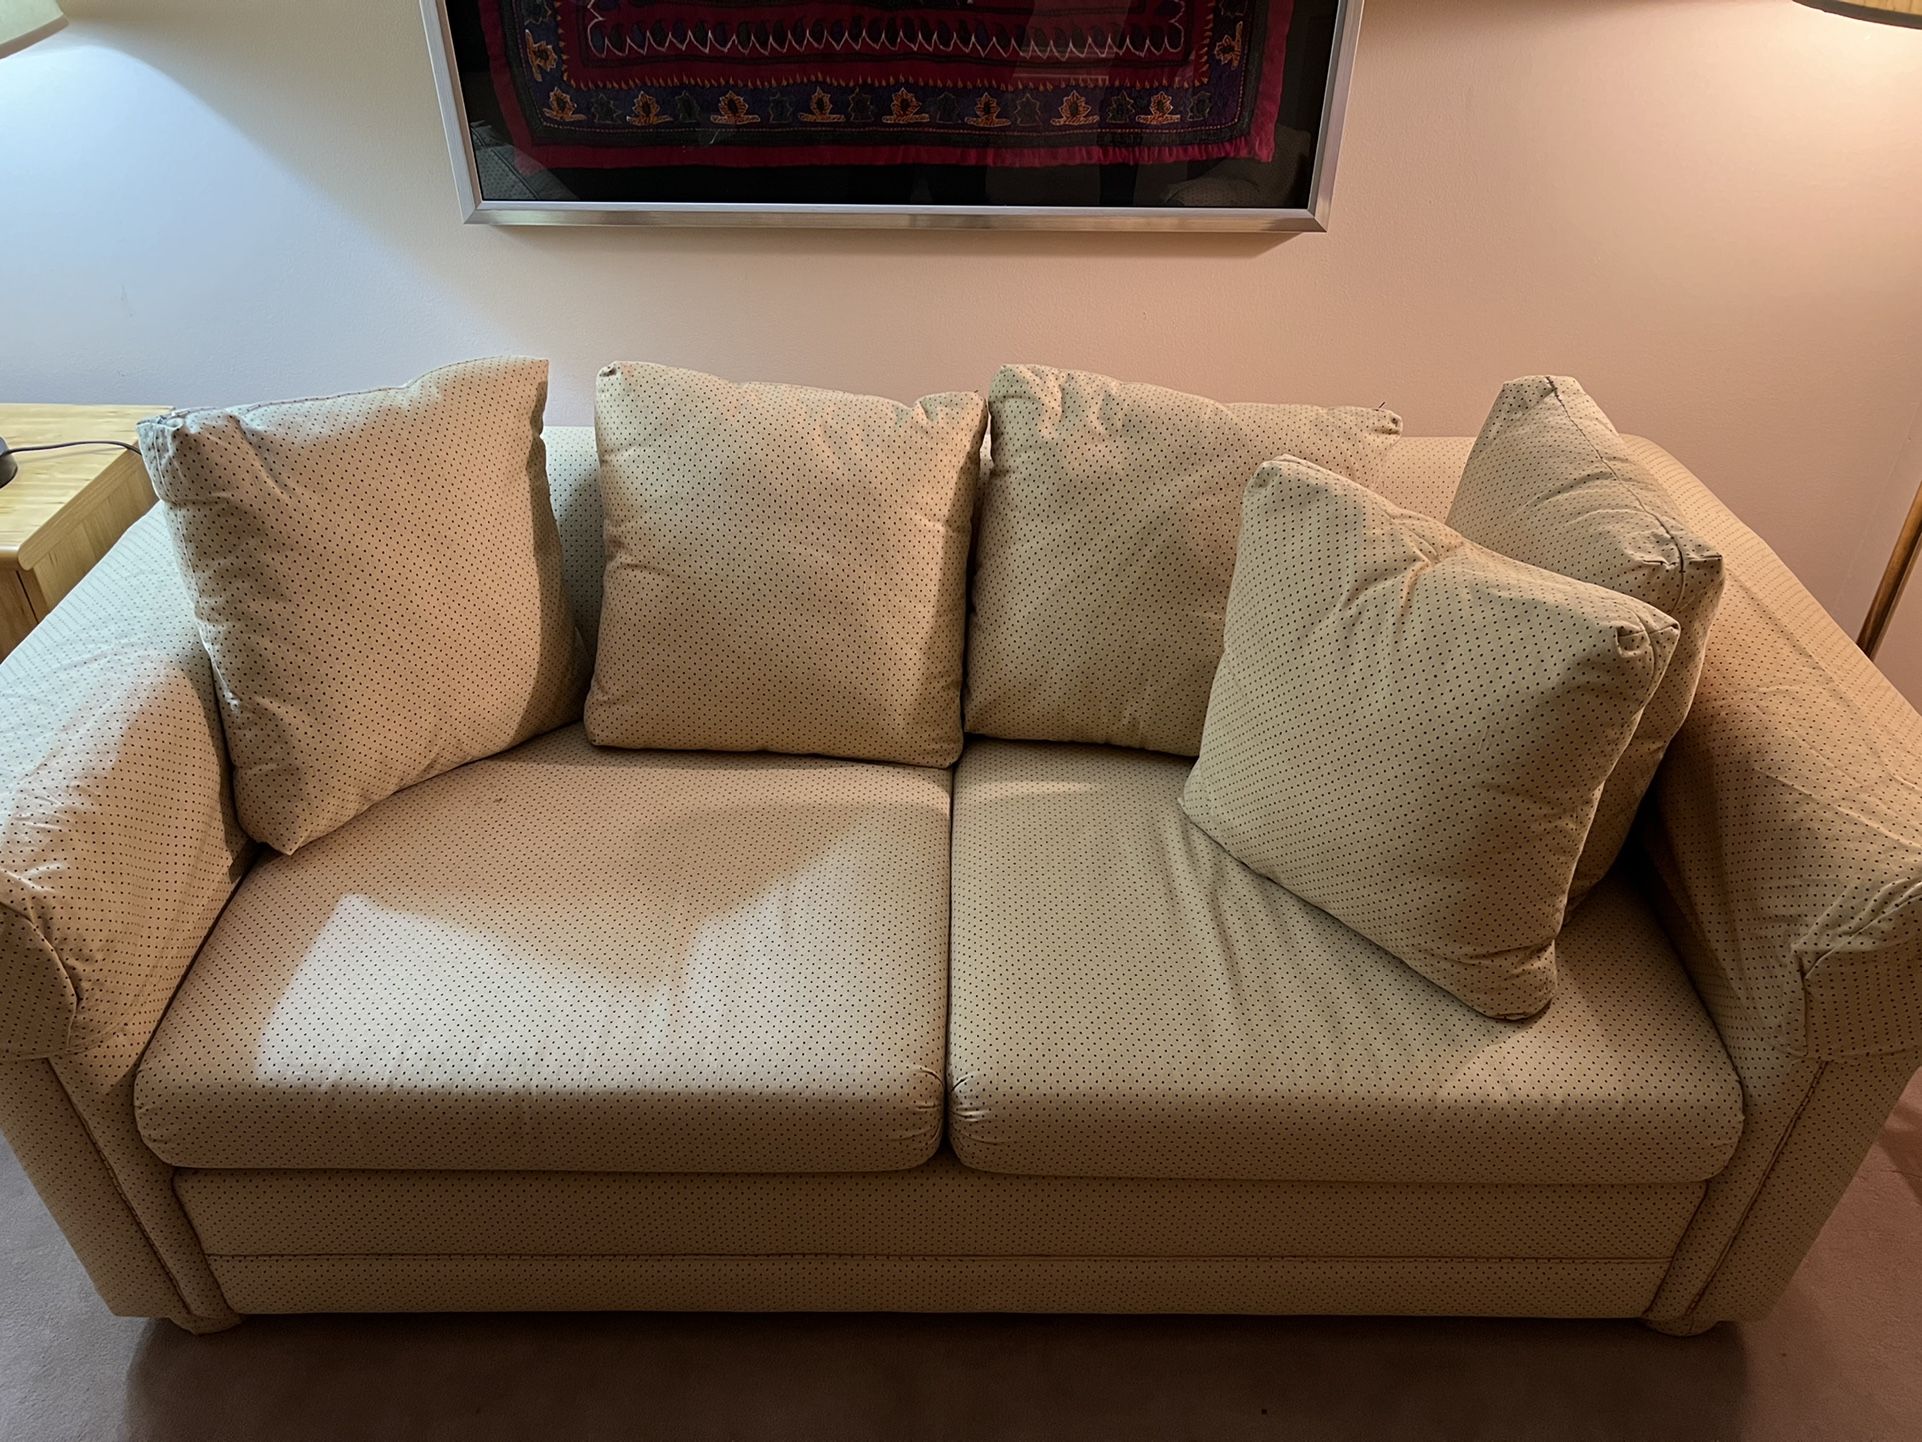 Couches For Sale! 